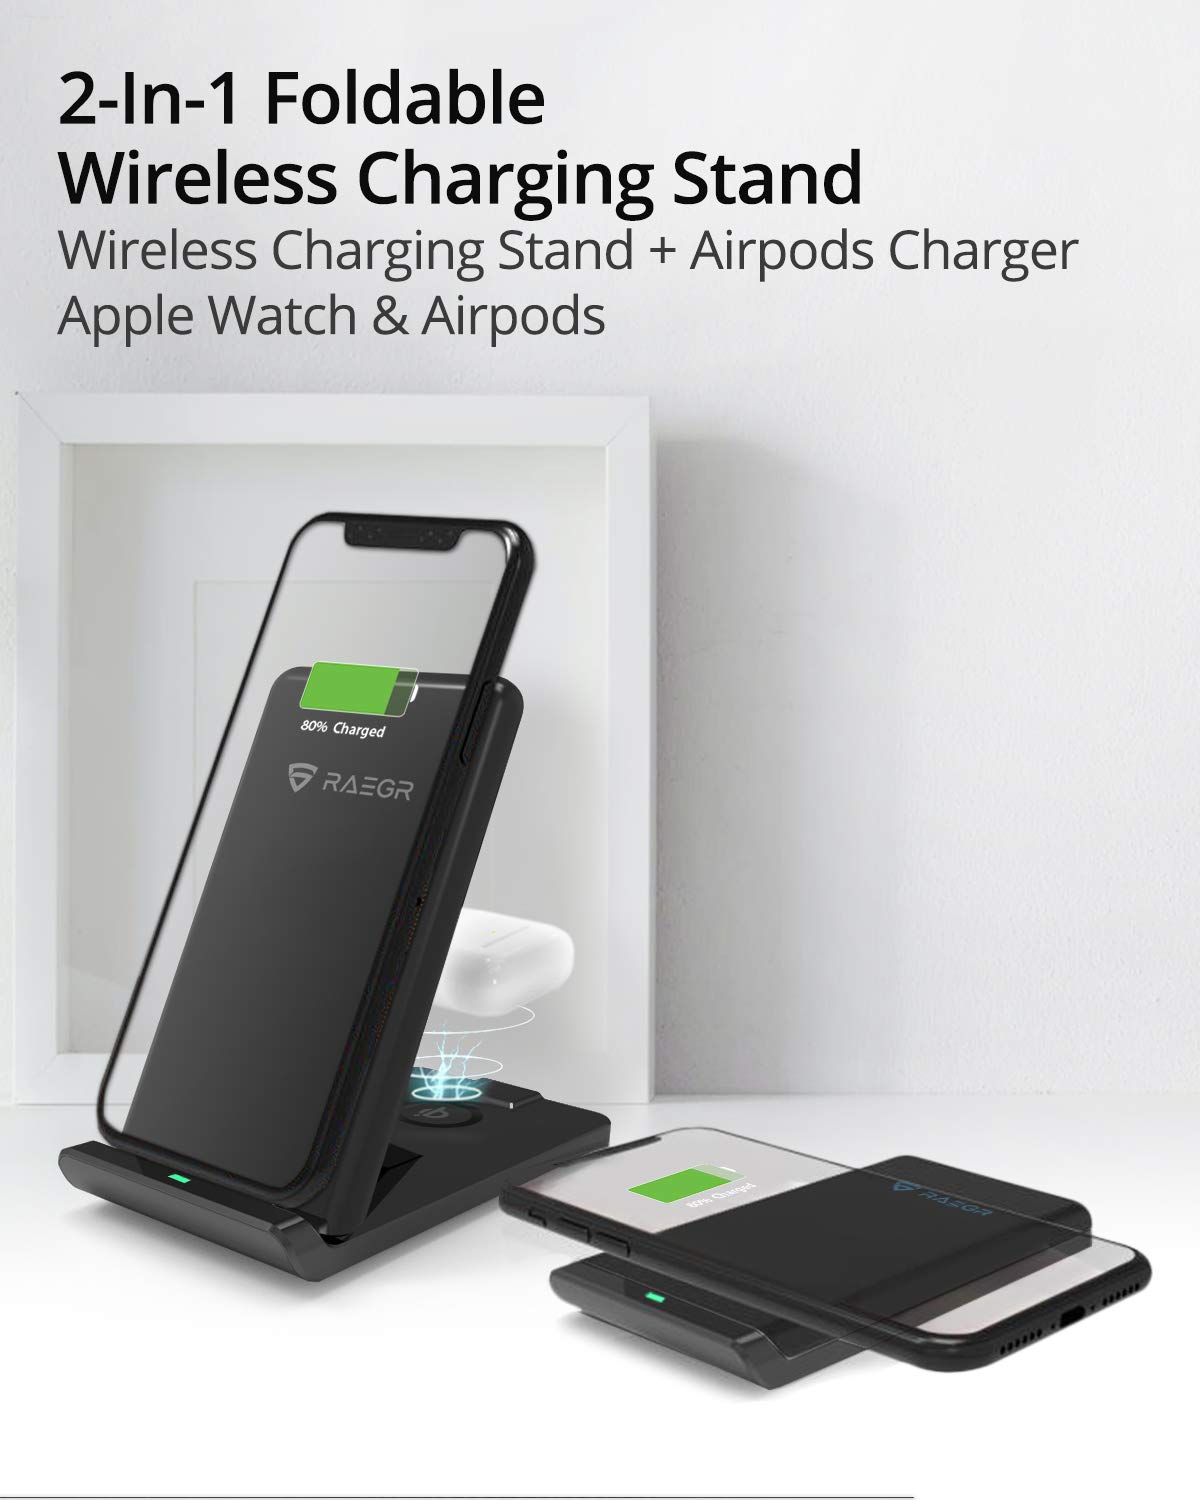 Wireless Charging Stand 2 in 1 Sandstone Black